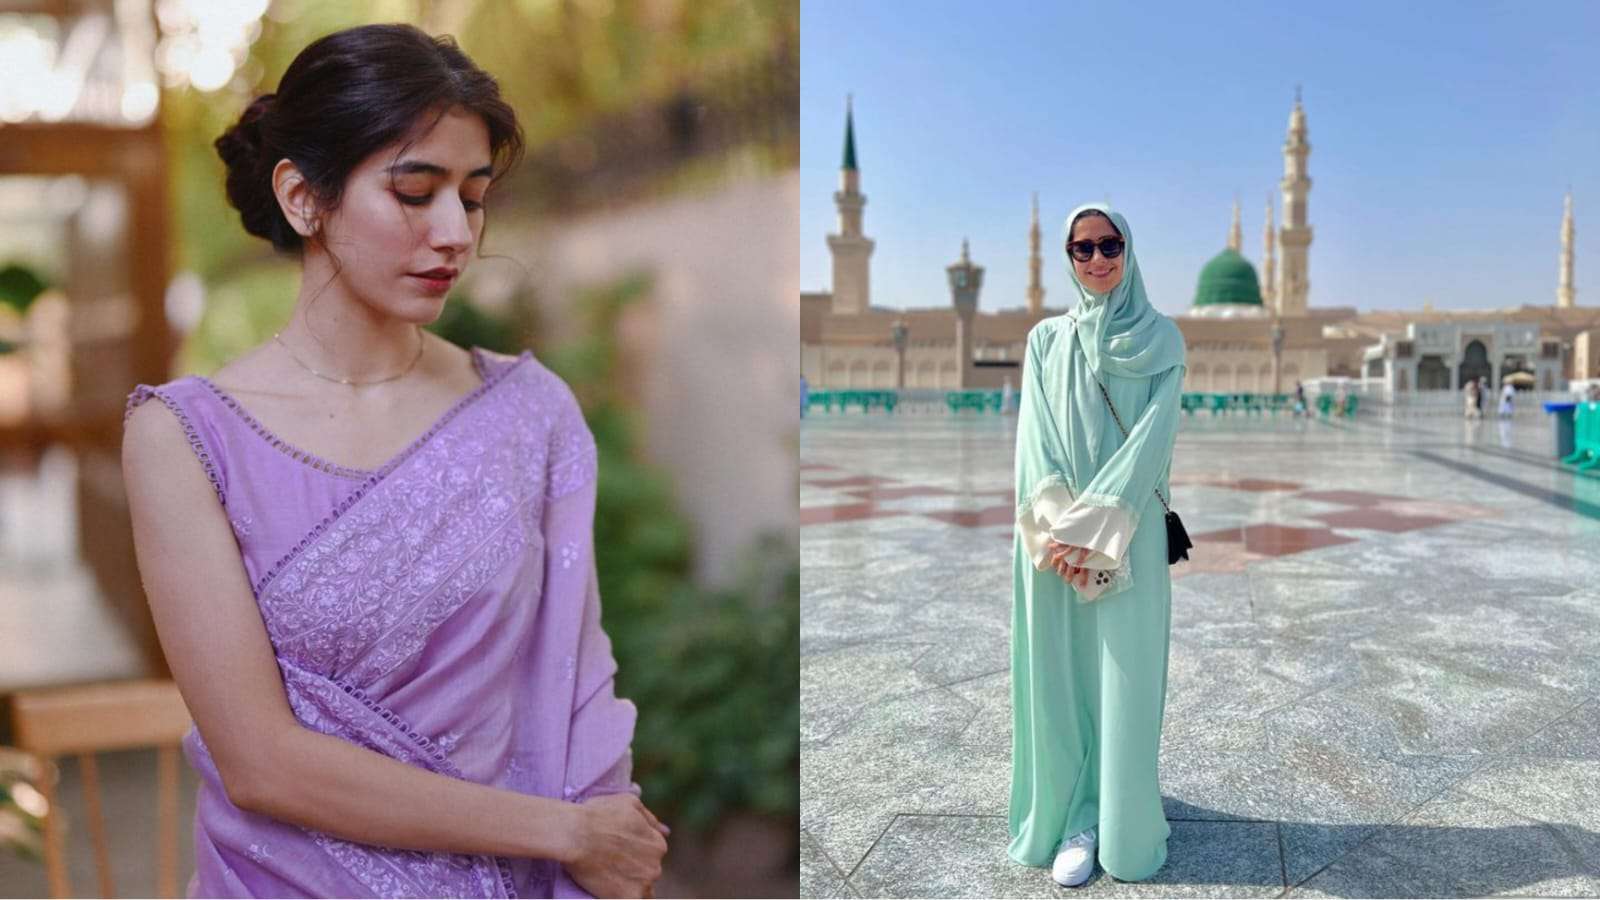 I left my heart in Madinah: Syra Yousuf performs Umrah